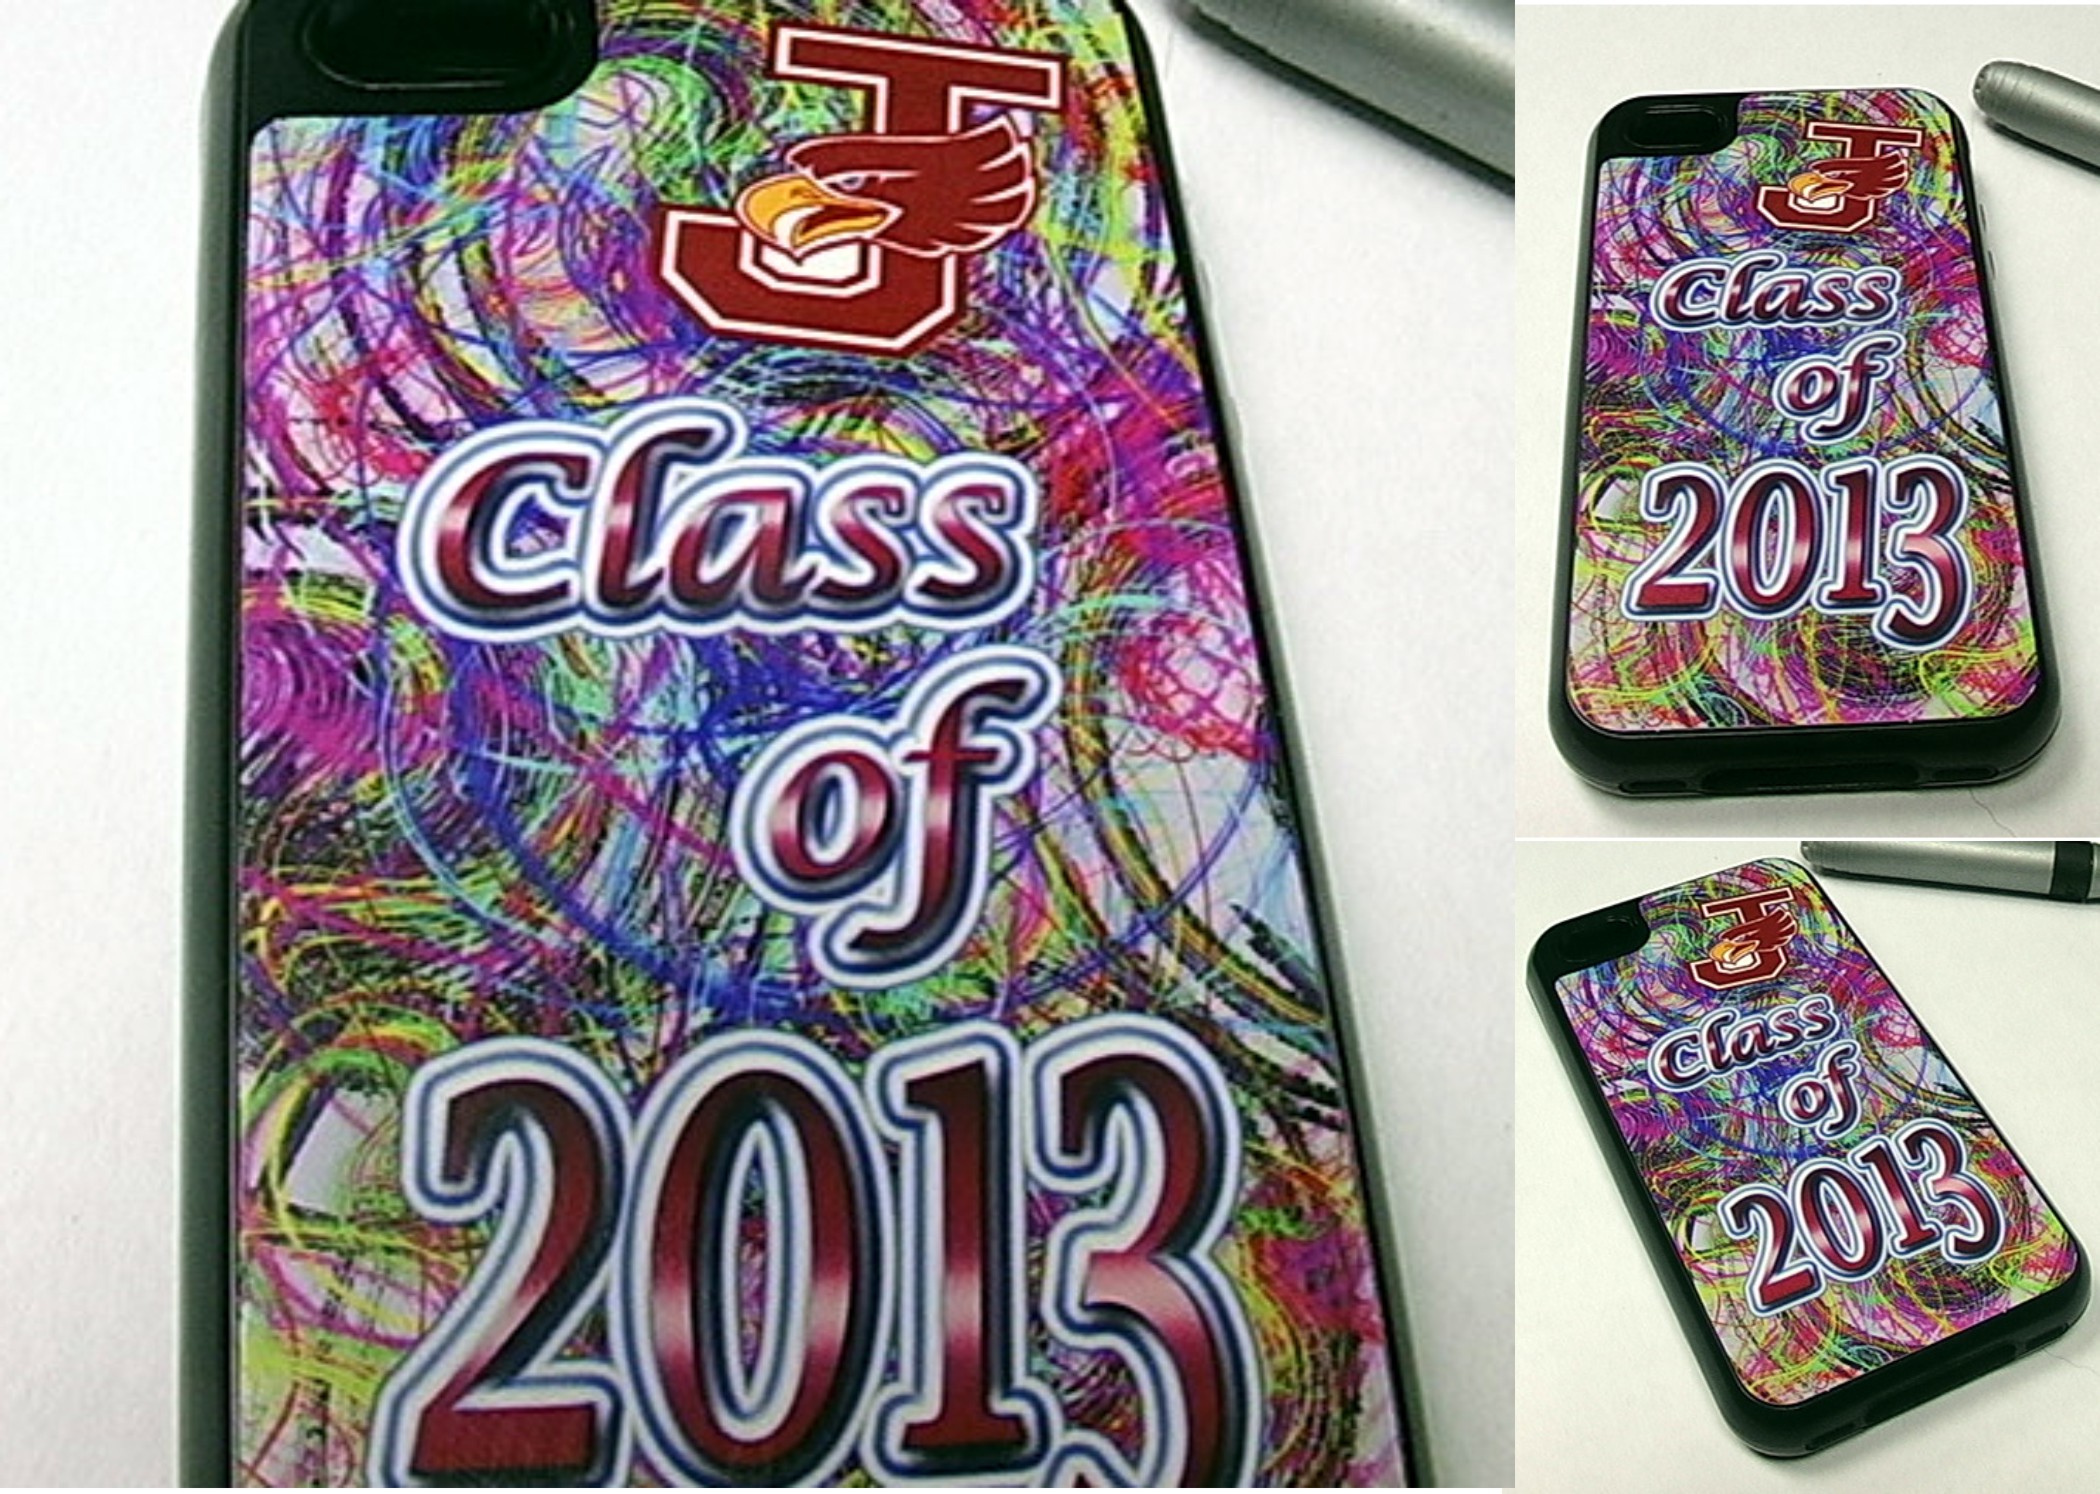 Class of 2013 w/logo 4/4s cover made with sublimation printing